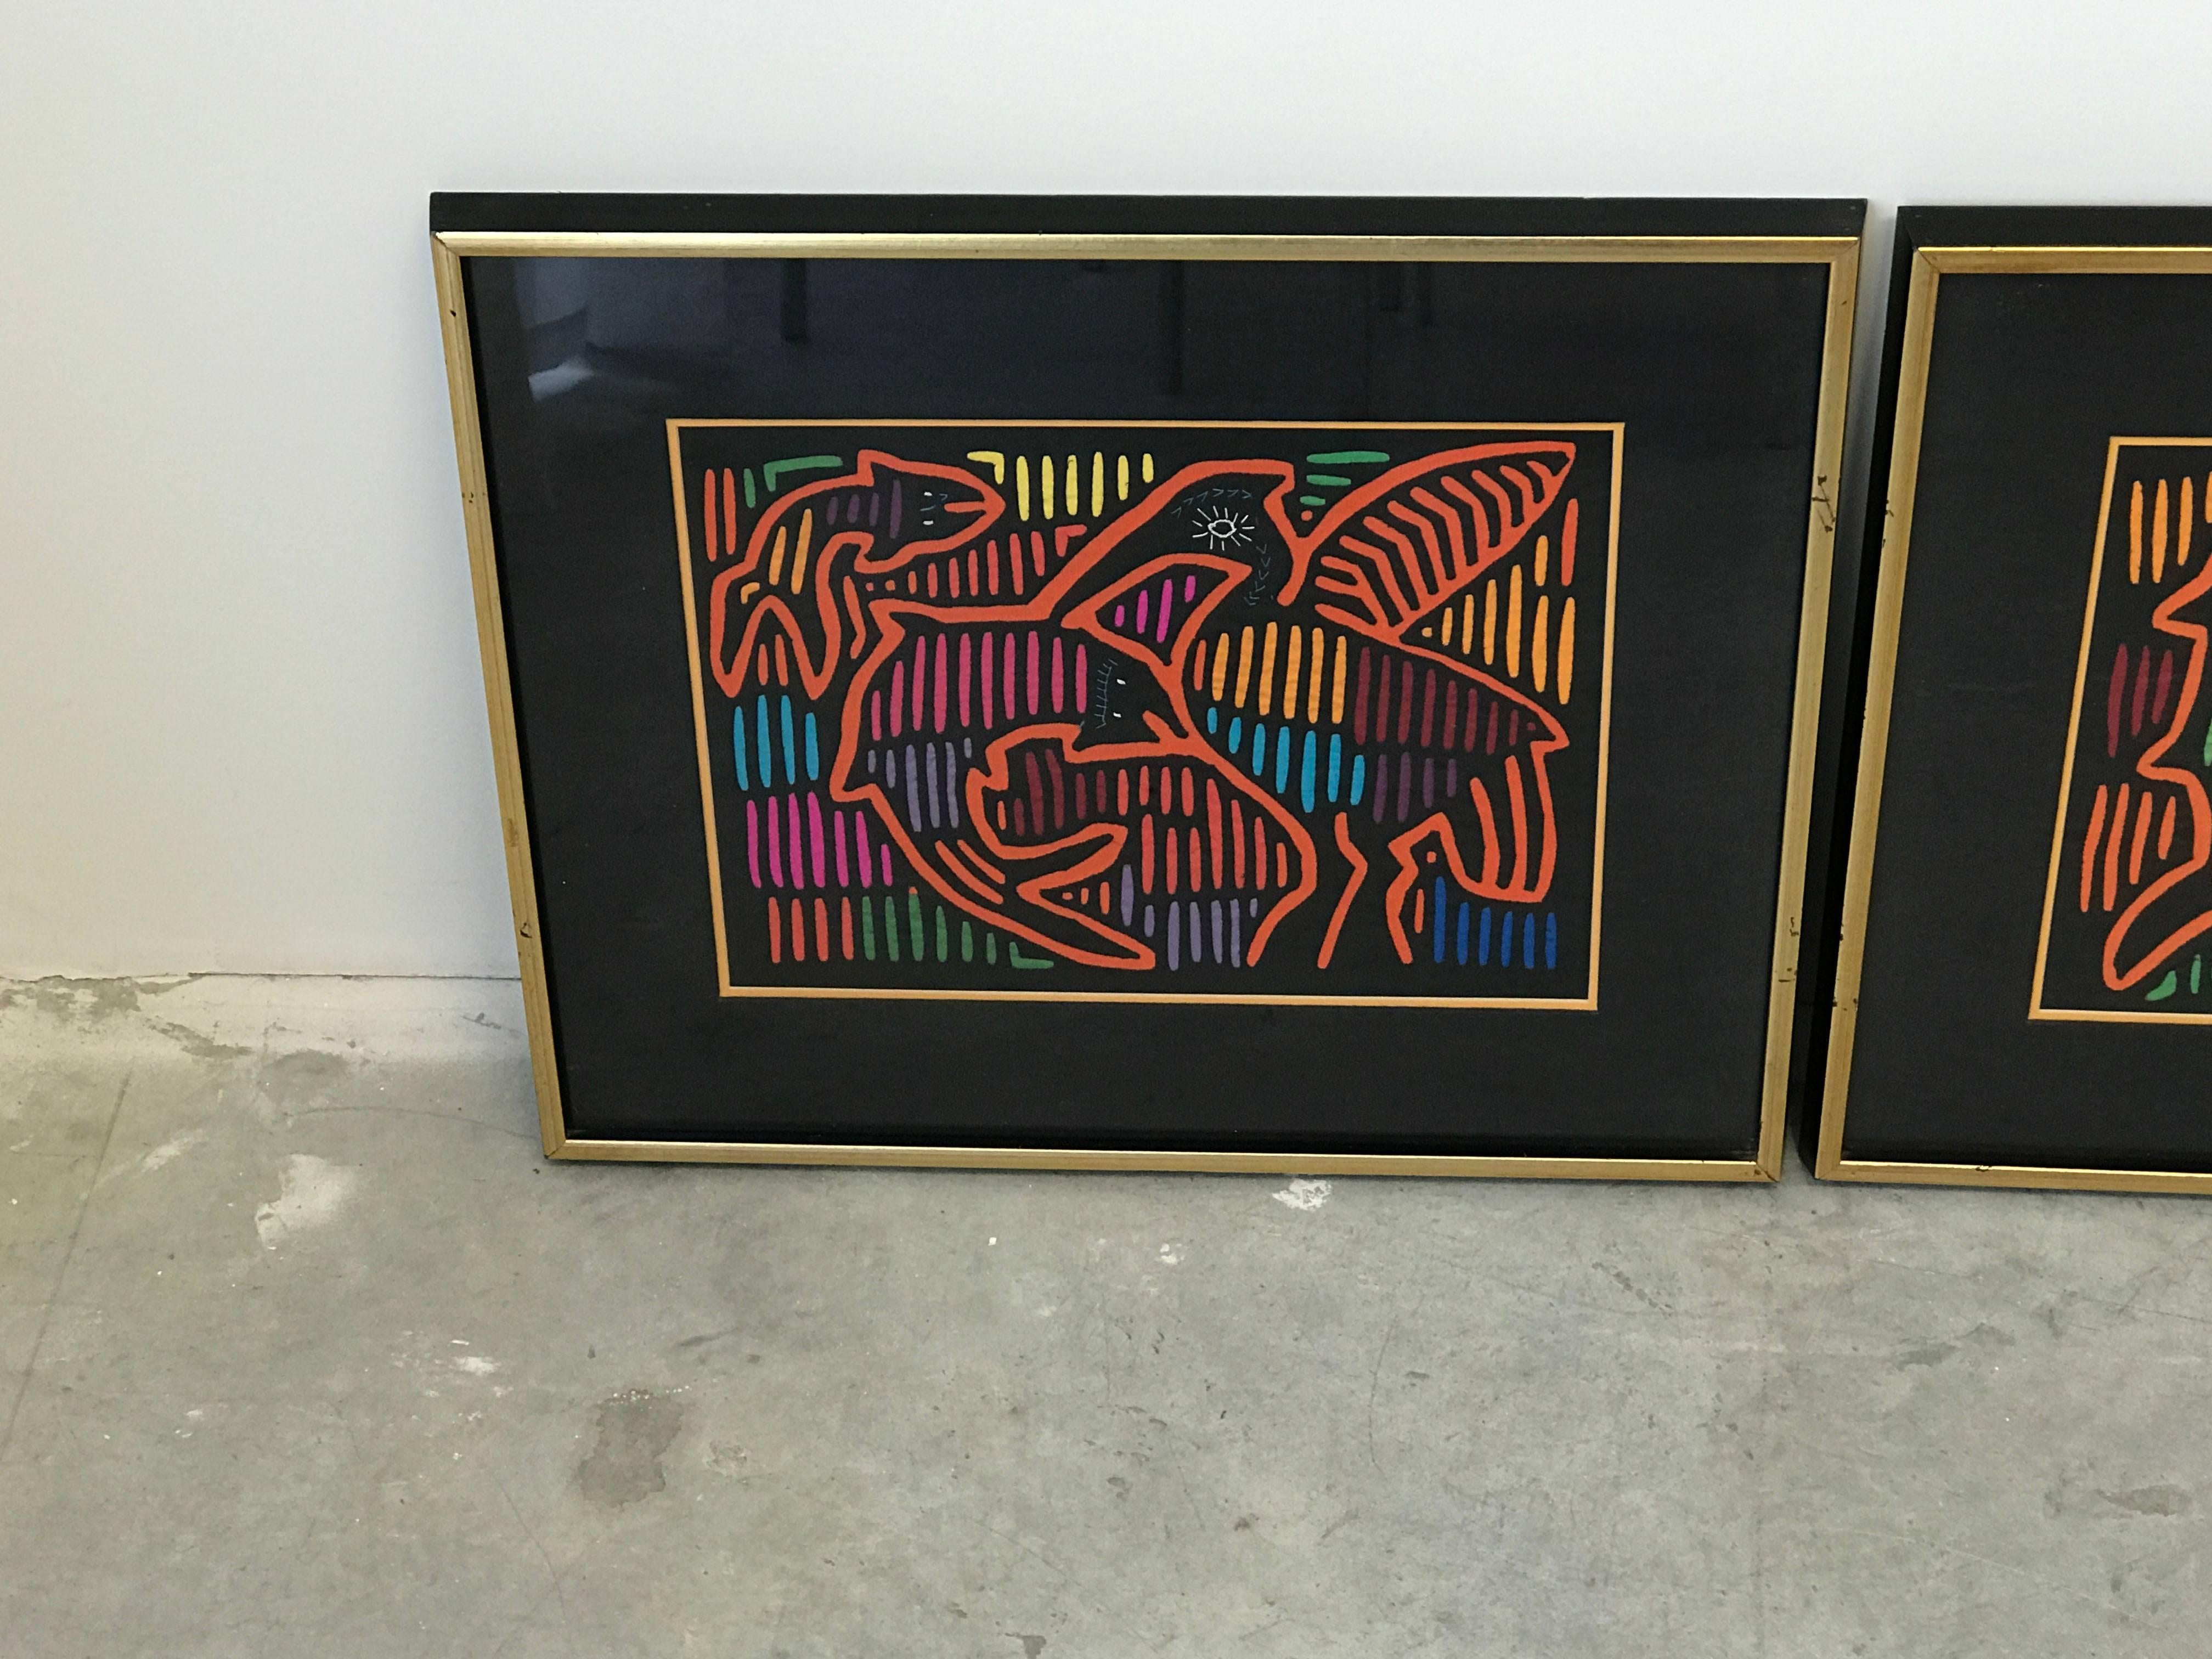 Offered is a stunning, pair of 1970s Guatemalan Mola textile panels framed. One features a fish and bird motif, the other is a fish and mammal motif. Each are framed in a thick black and gold frame, behind glass. 

Molas are handmade using a reverse